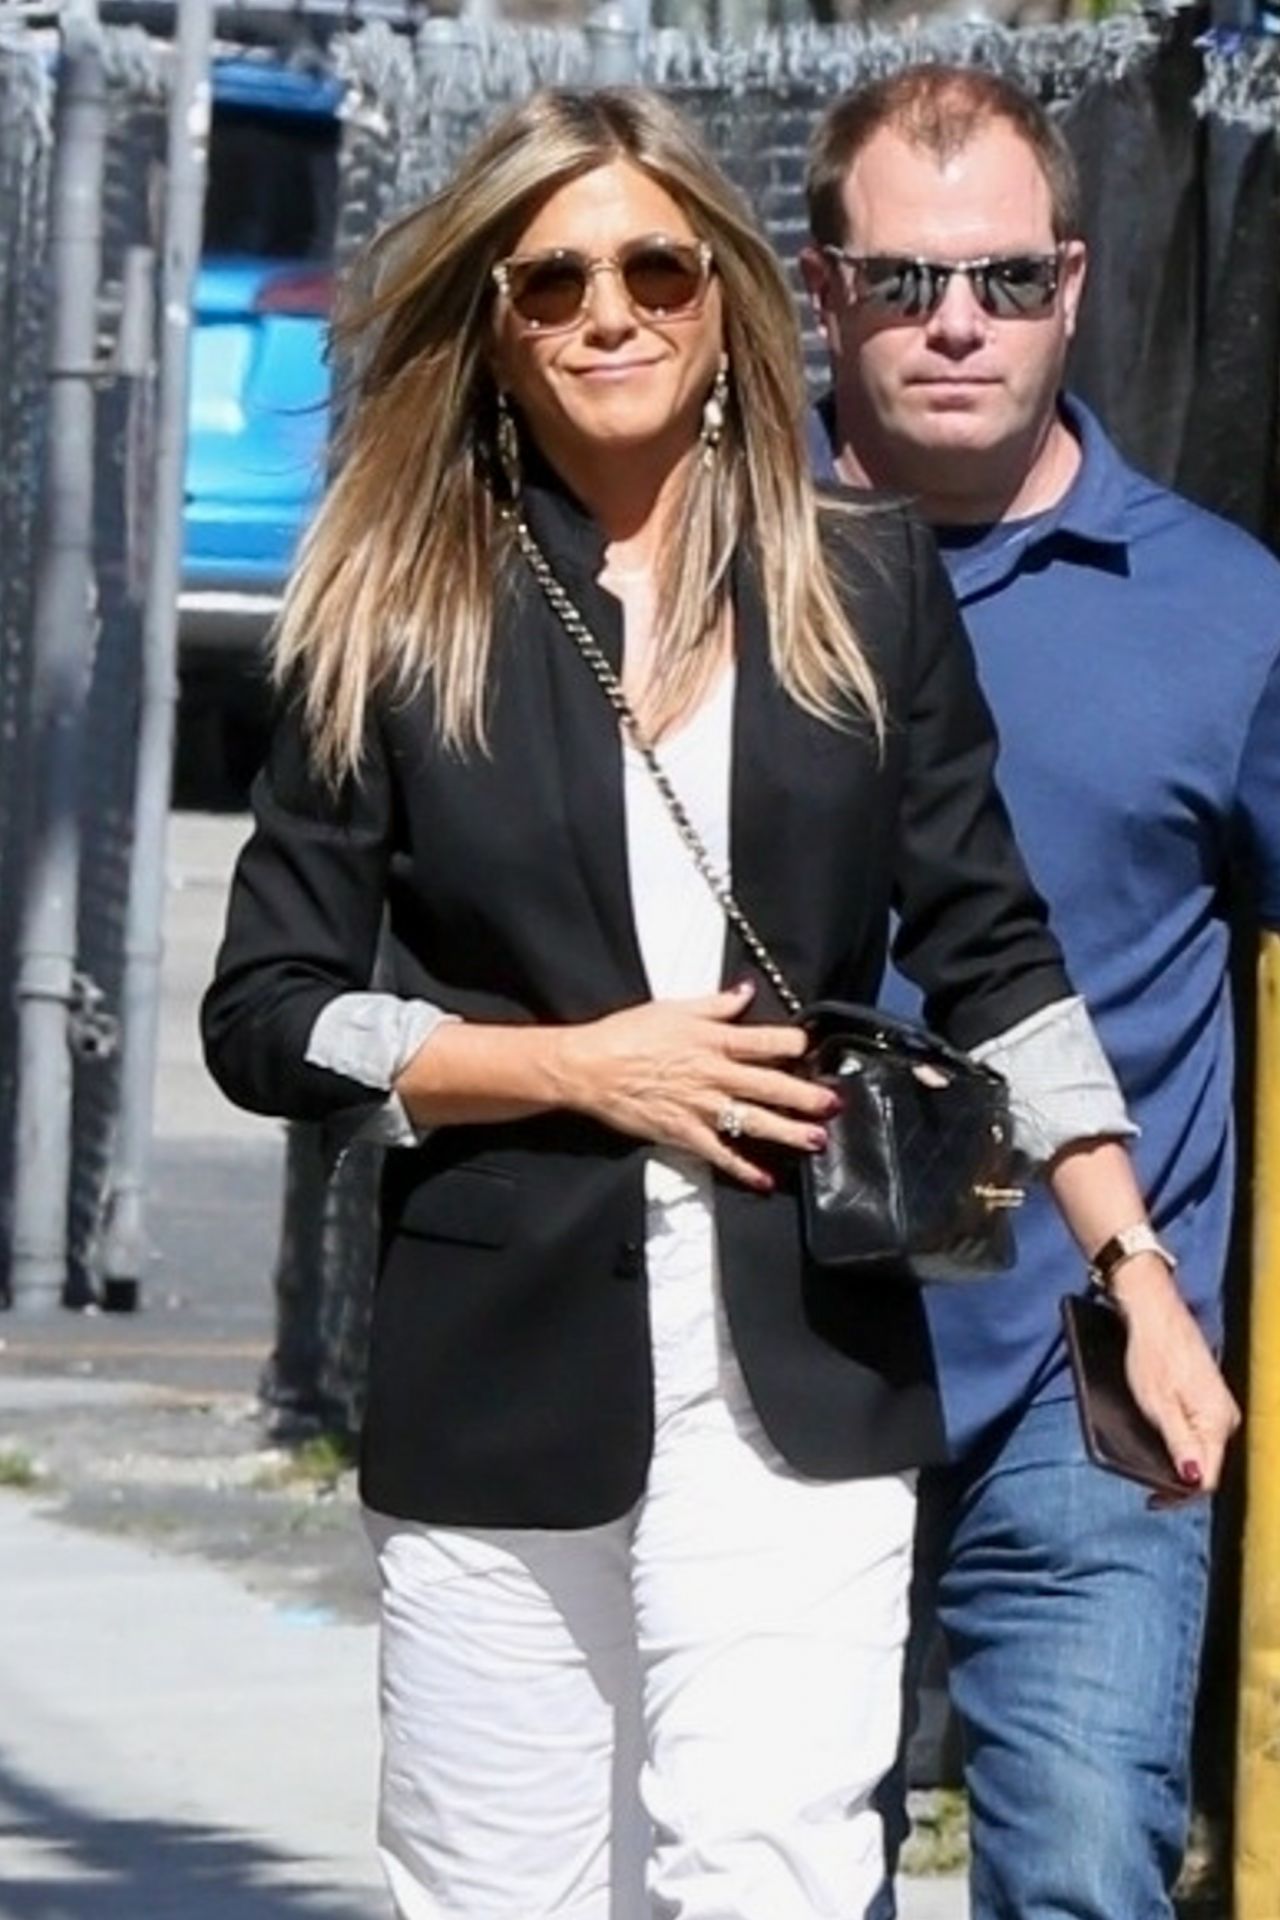 jennifer-aniston-arriving-to-appear-on-jimmy-kimmel-live-in-hollywood-05-29-2019-2.jpg